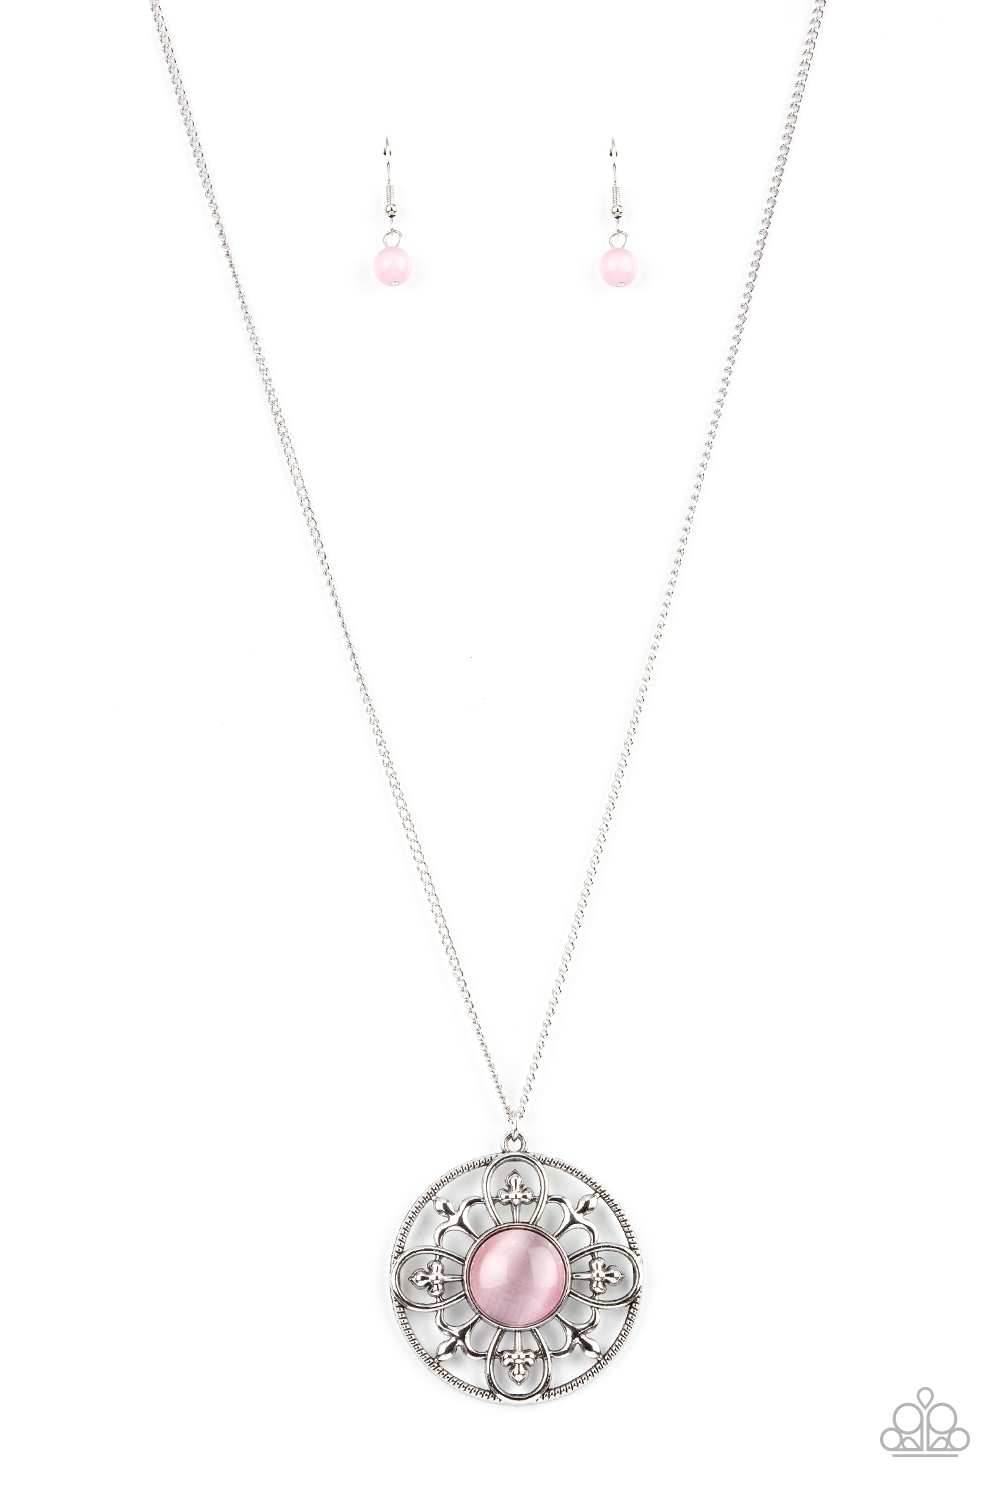 Necklace - Celestial Compass - Pink